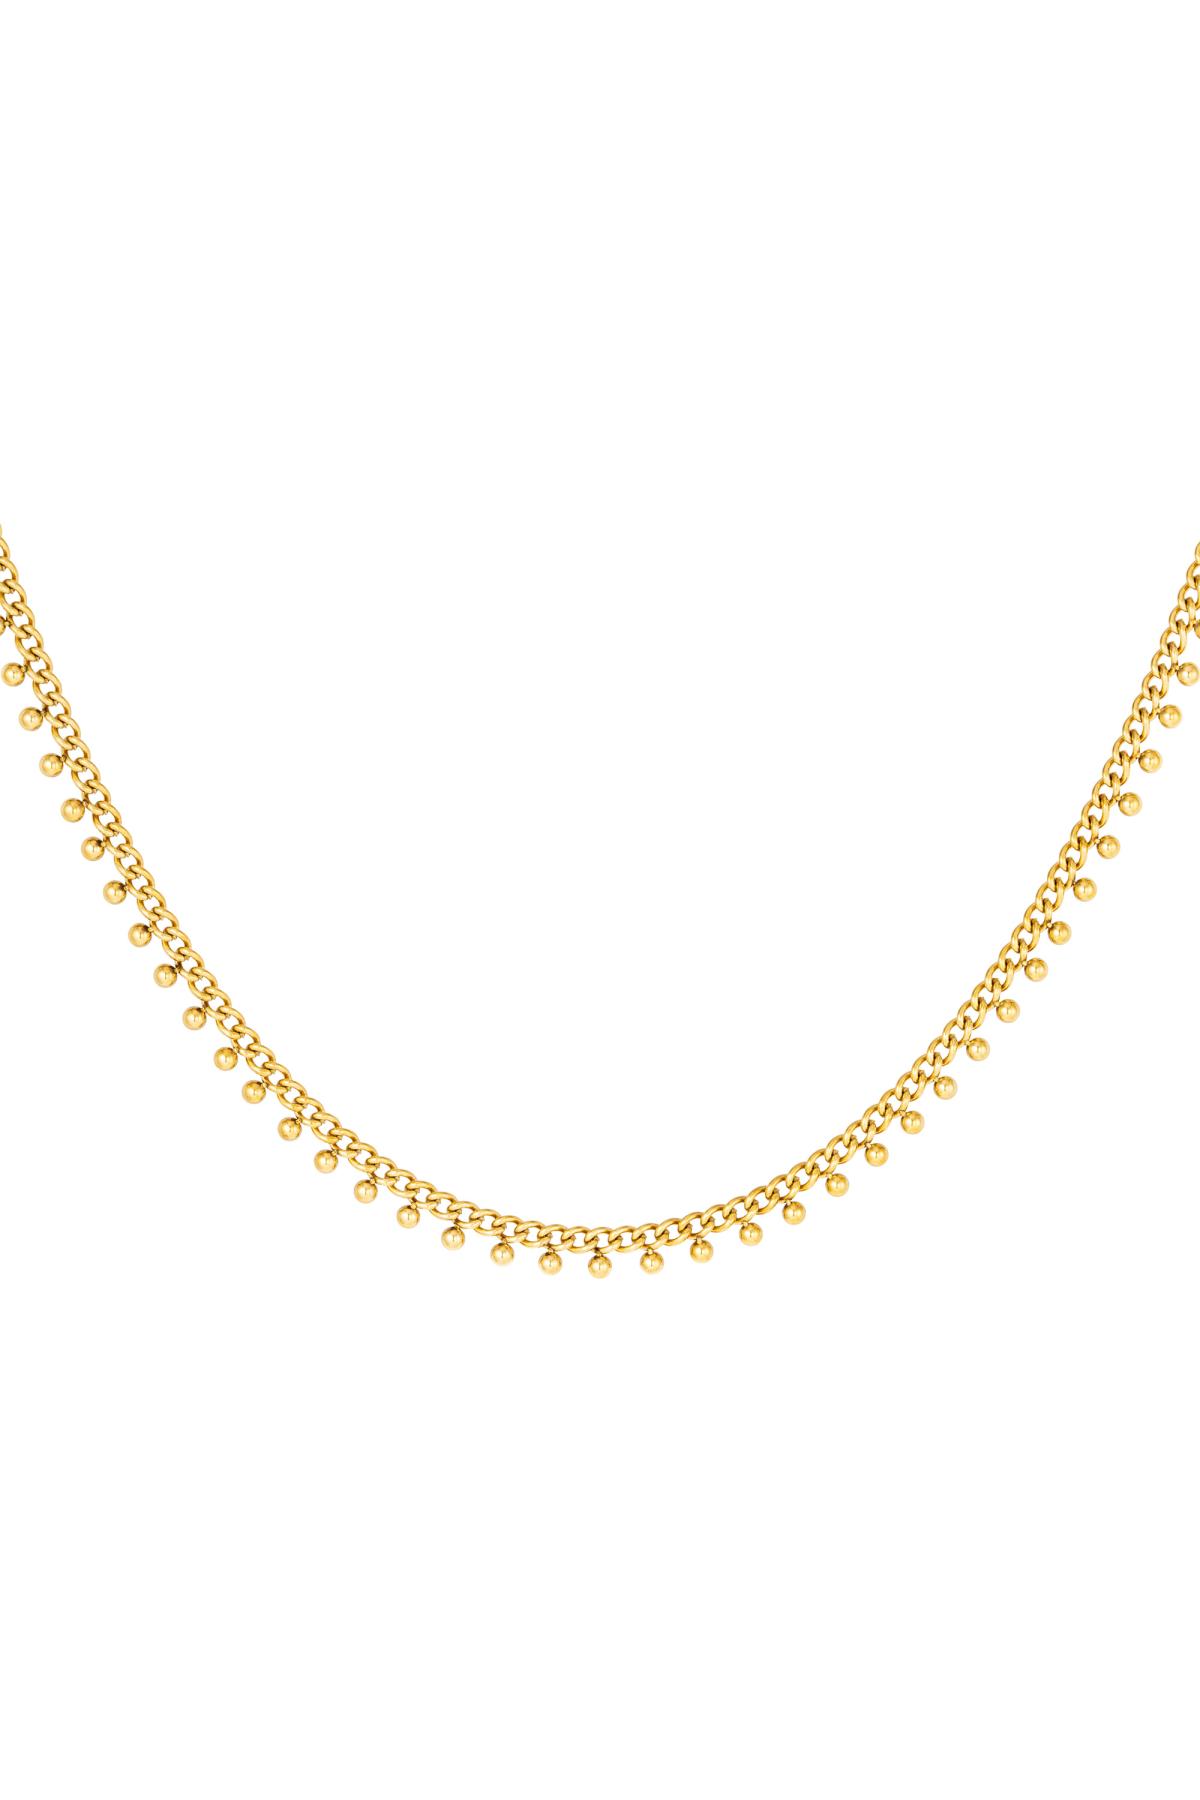 Stainless steel necklace dots Gold 